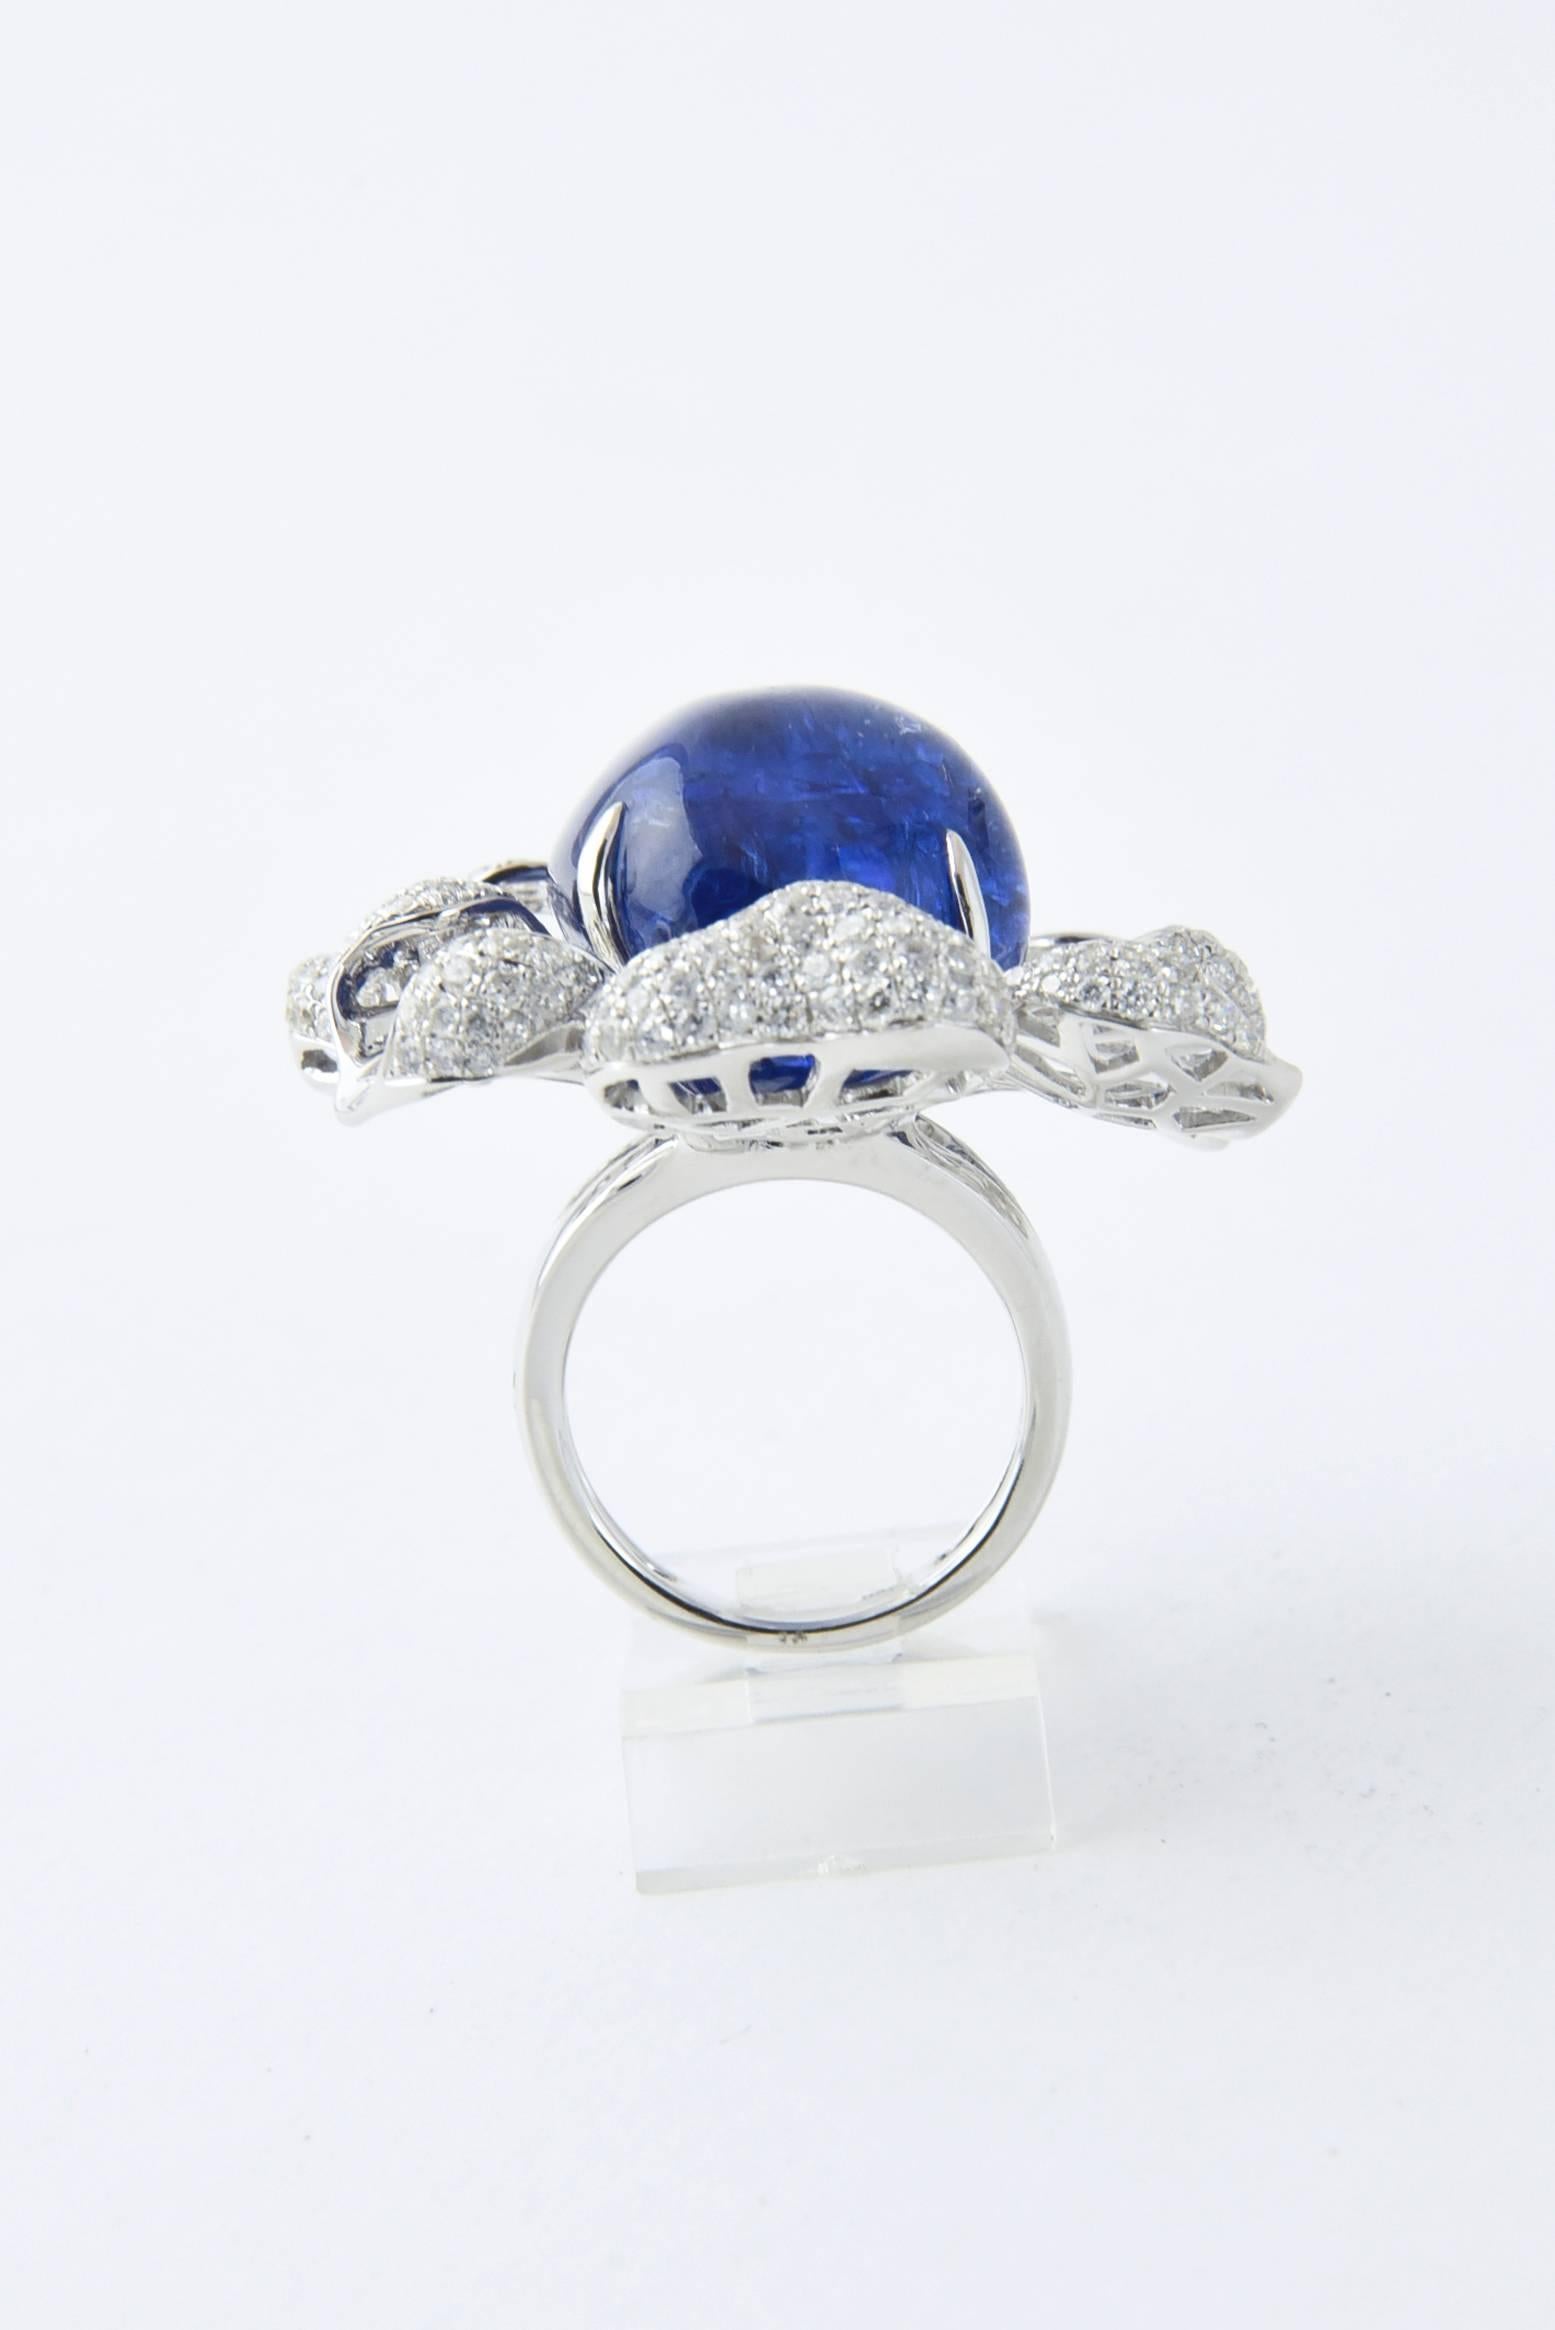 Contemporary Modern Large Tanzanite Diamond Gold Flower Statement Ring For Sale